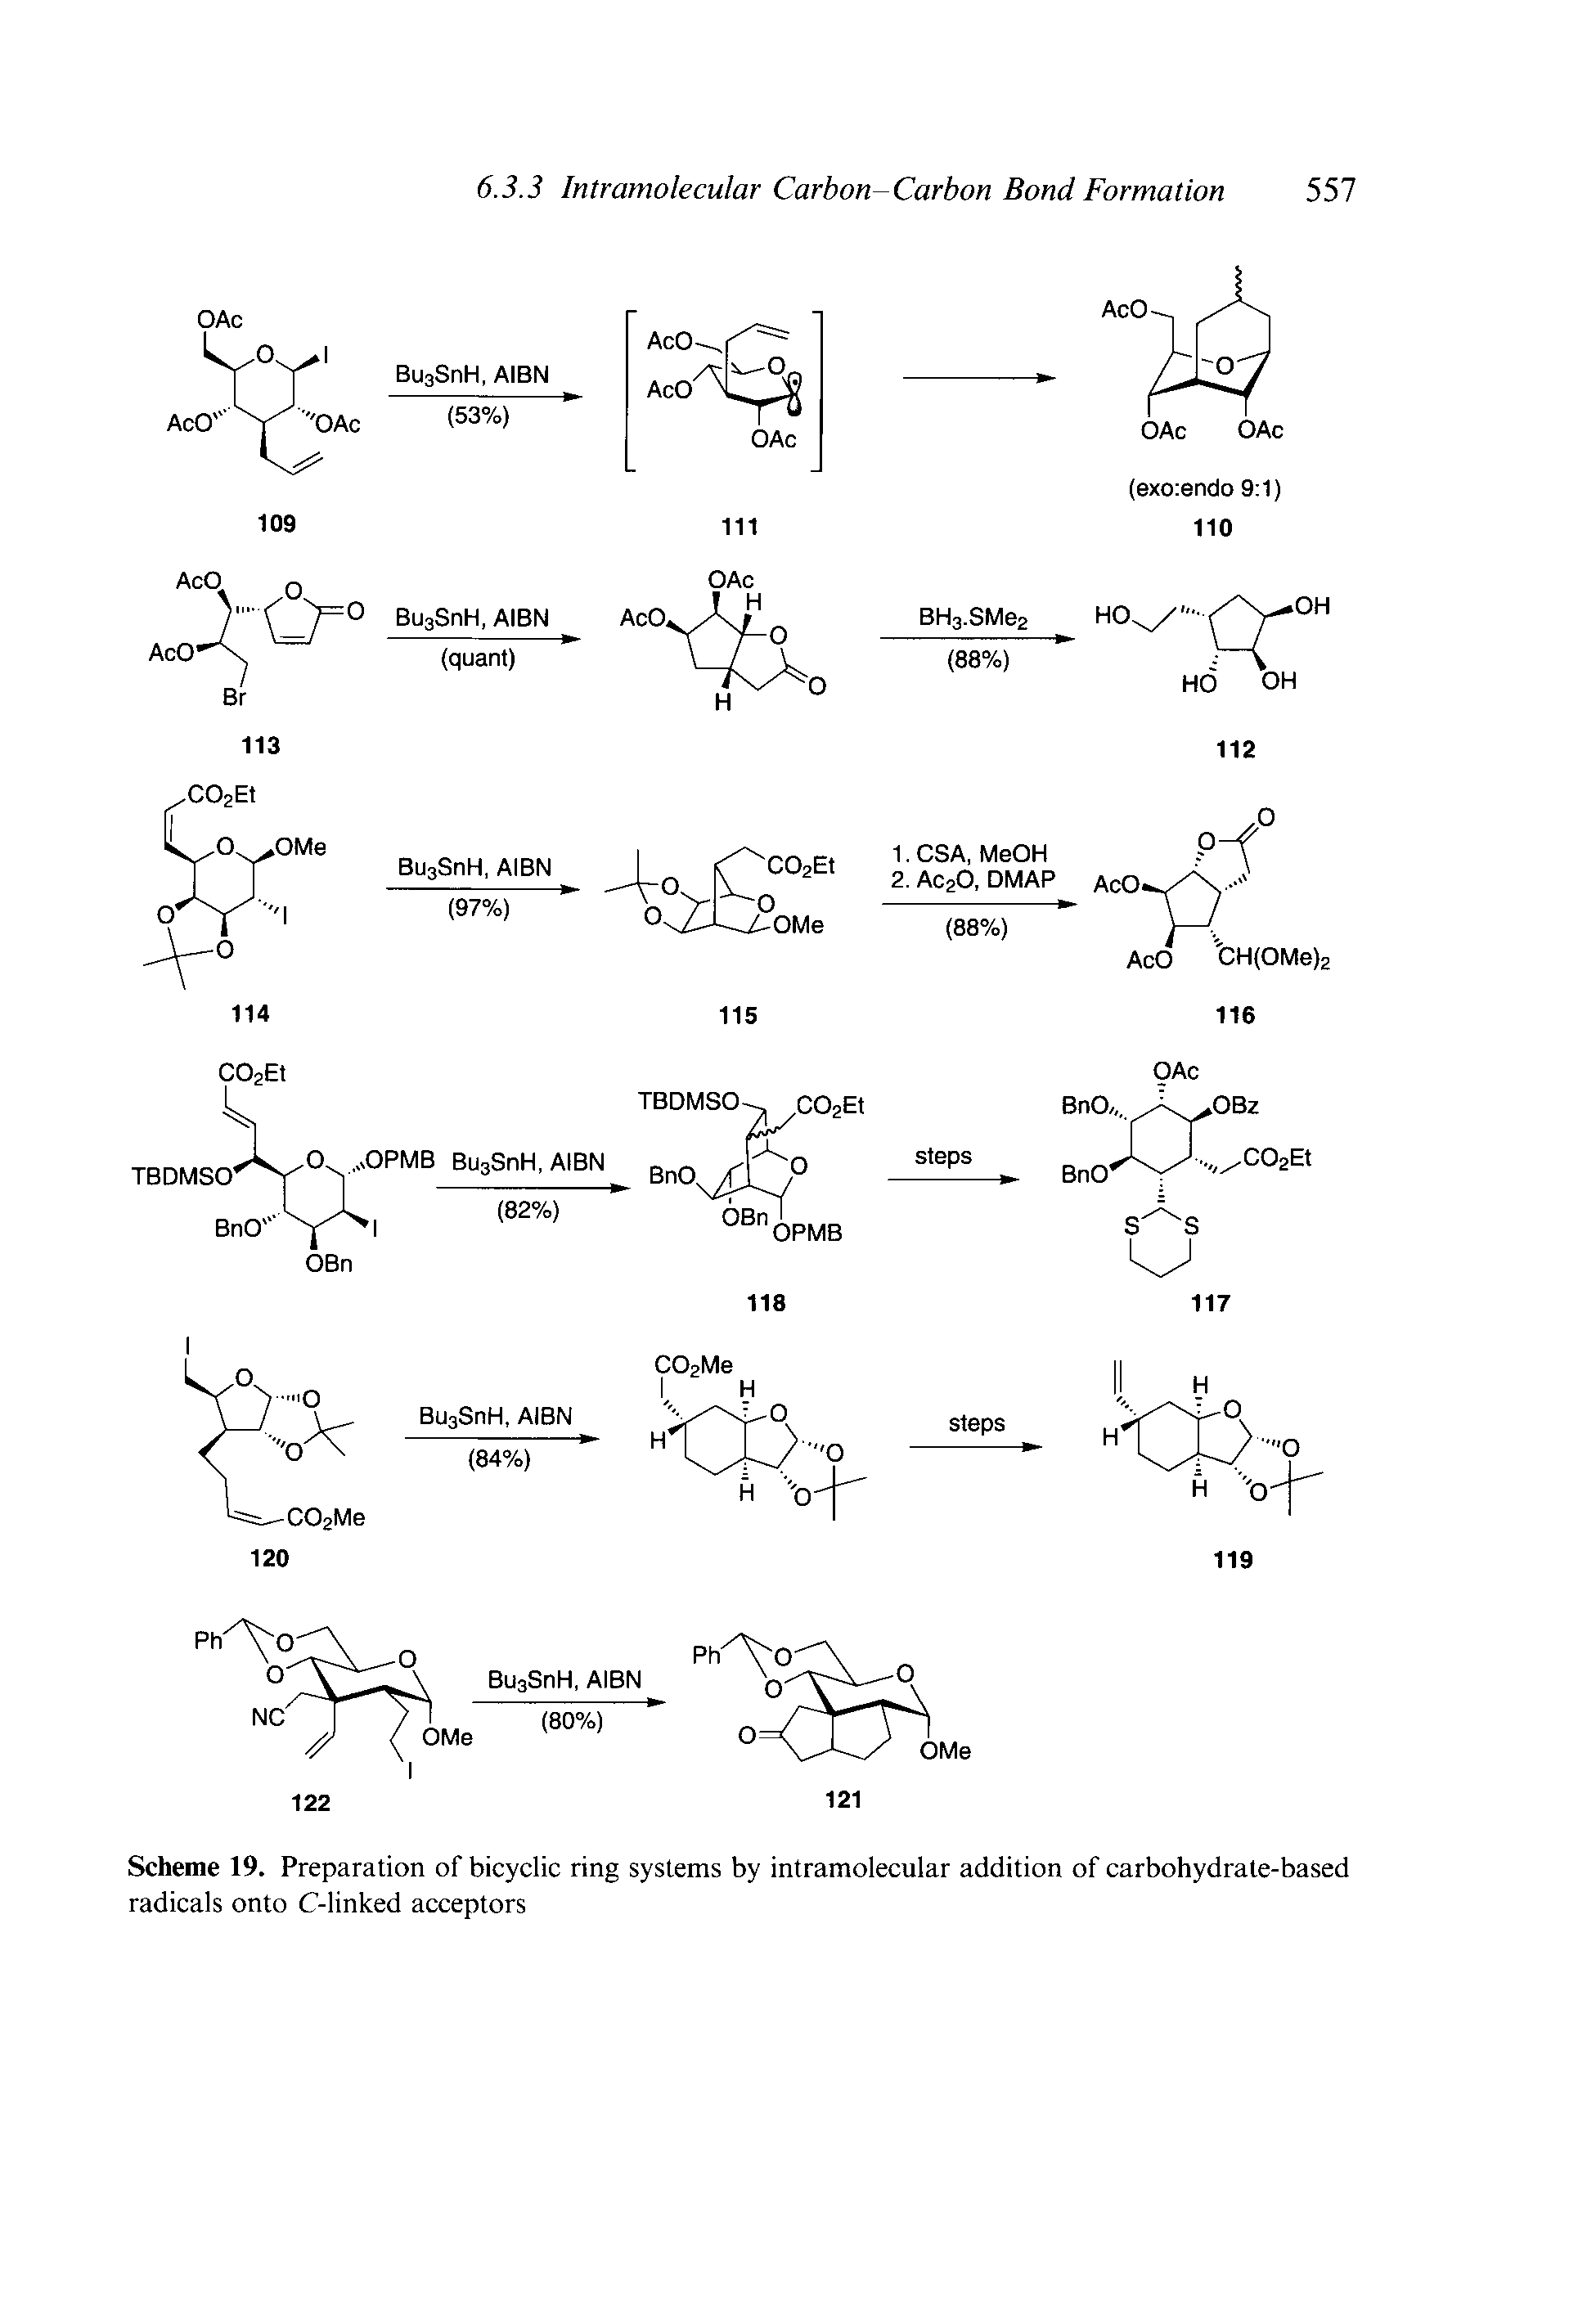 Scheme 19. Preparation of bicyclic ring systems by intramolecular addition of carbohydrate-based radicals onto C-linked acceptors...